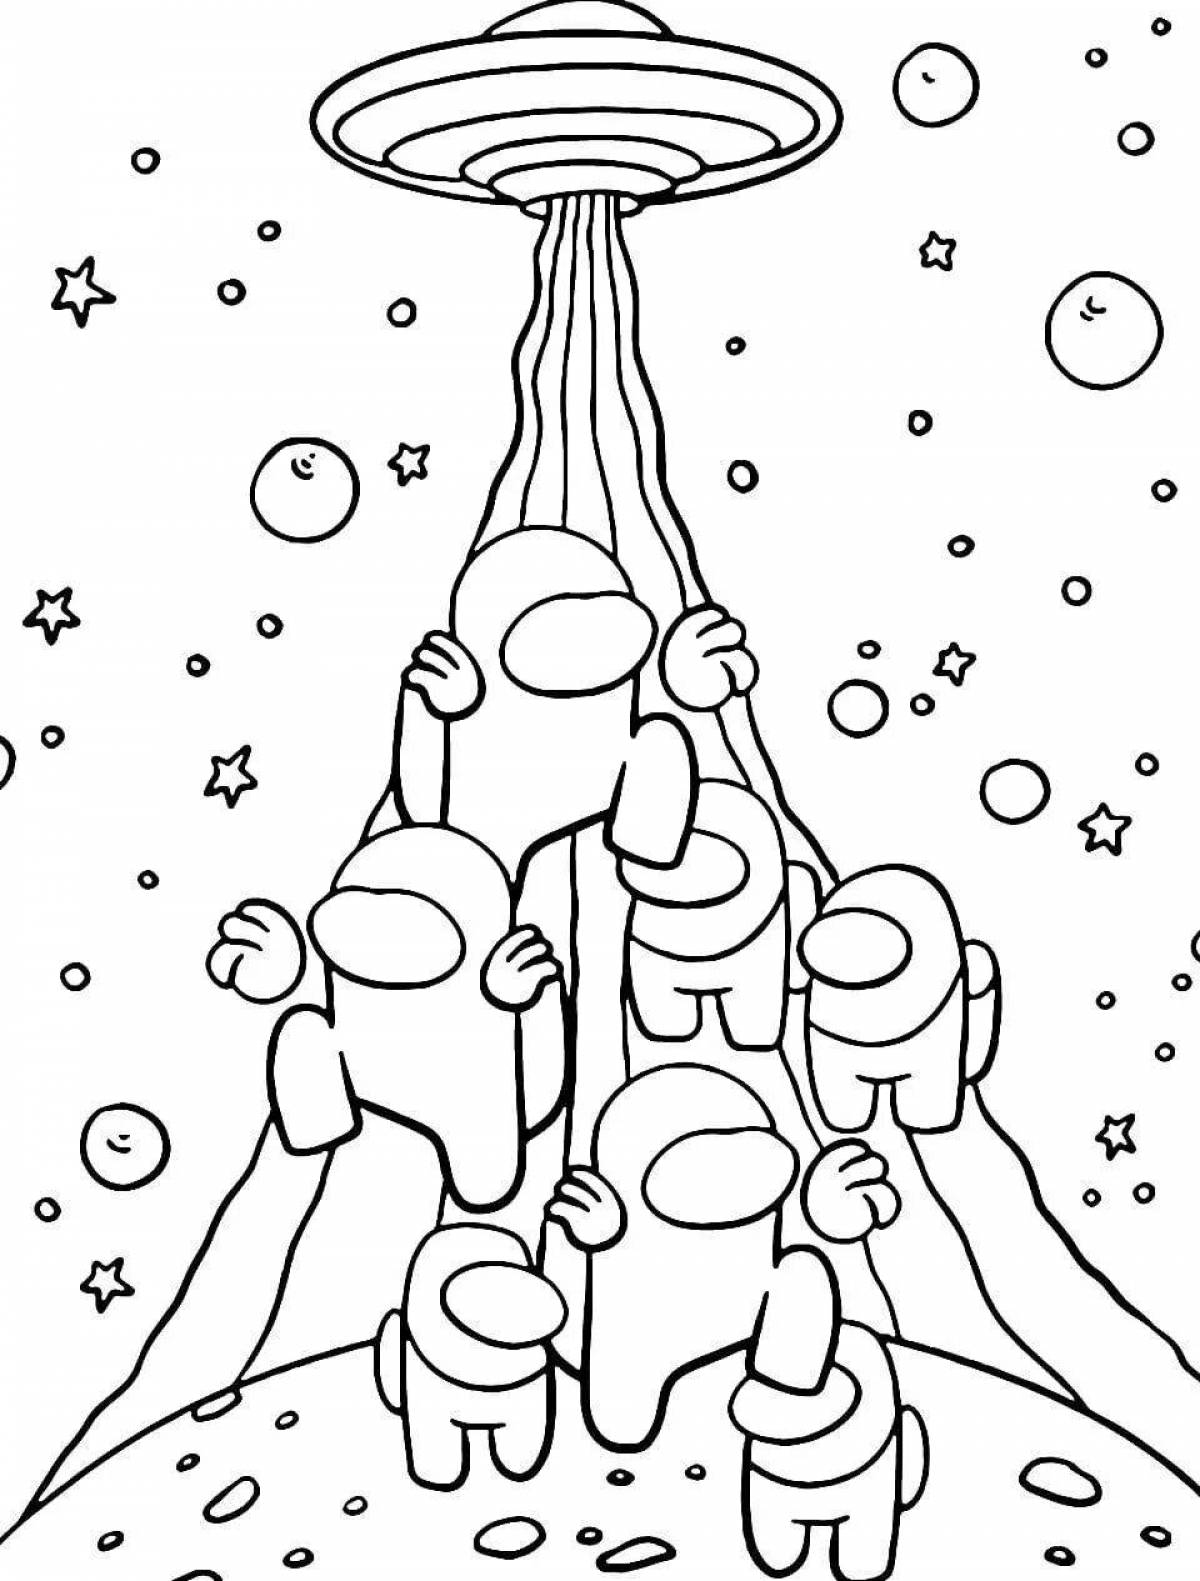 Exquisite space coloring game